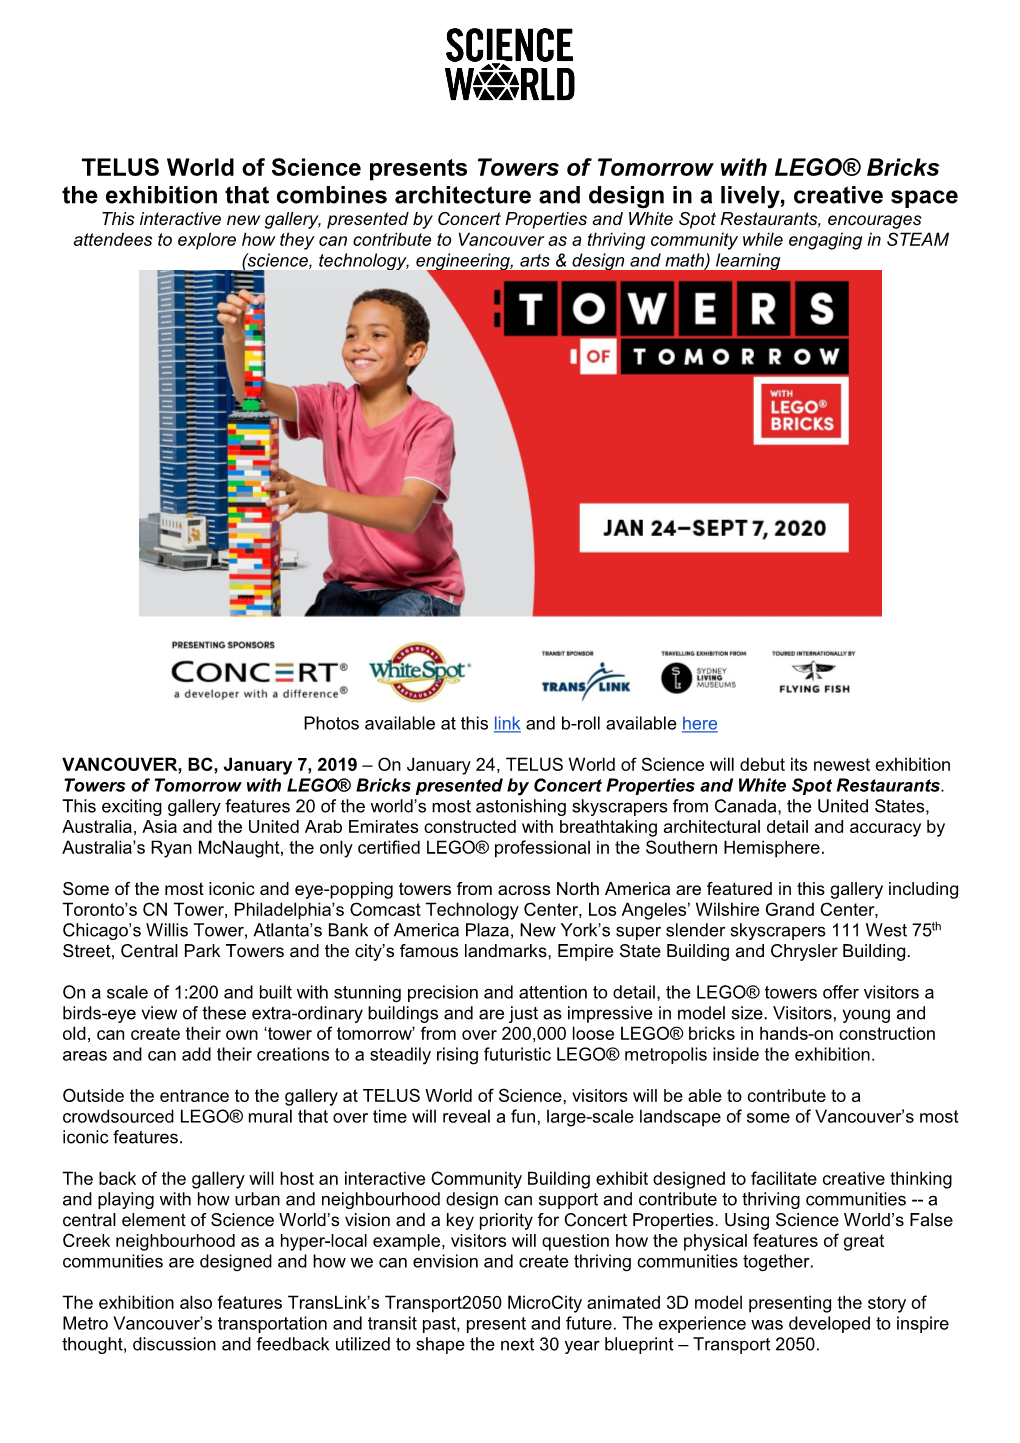 TELUS World of Science Presents Towers of Tomorrow with LEGO